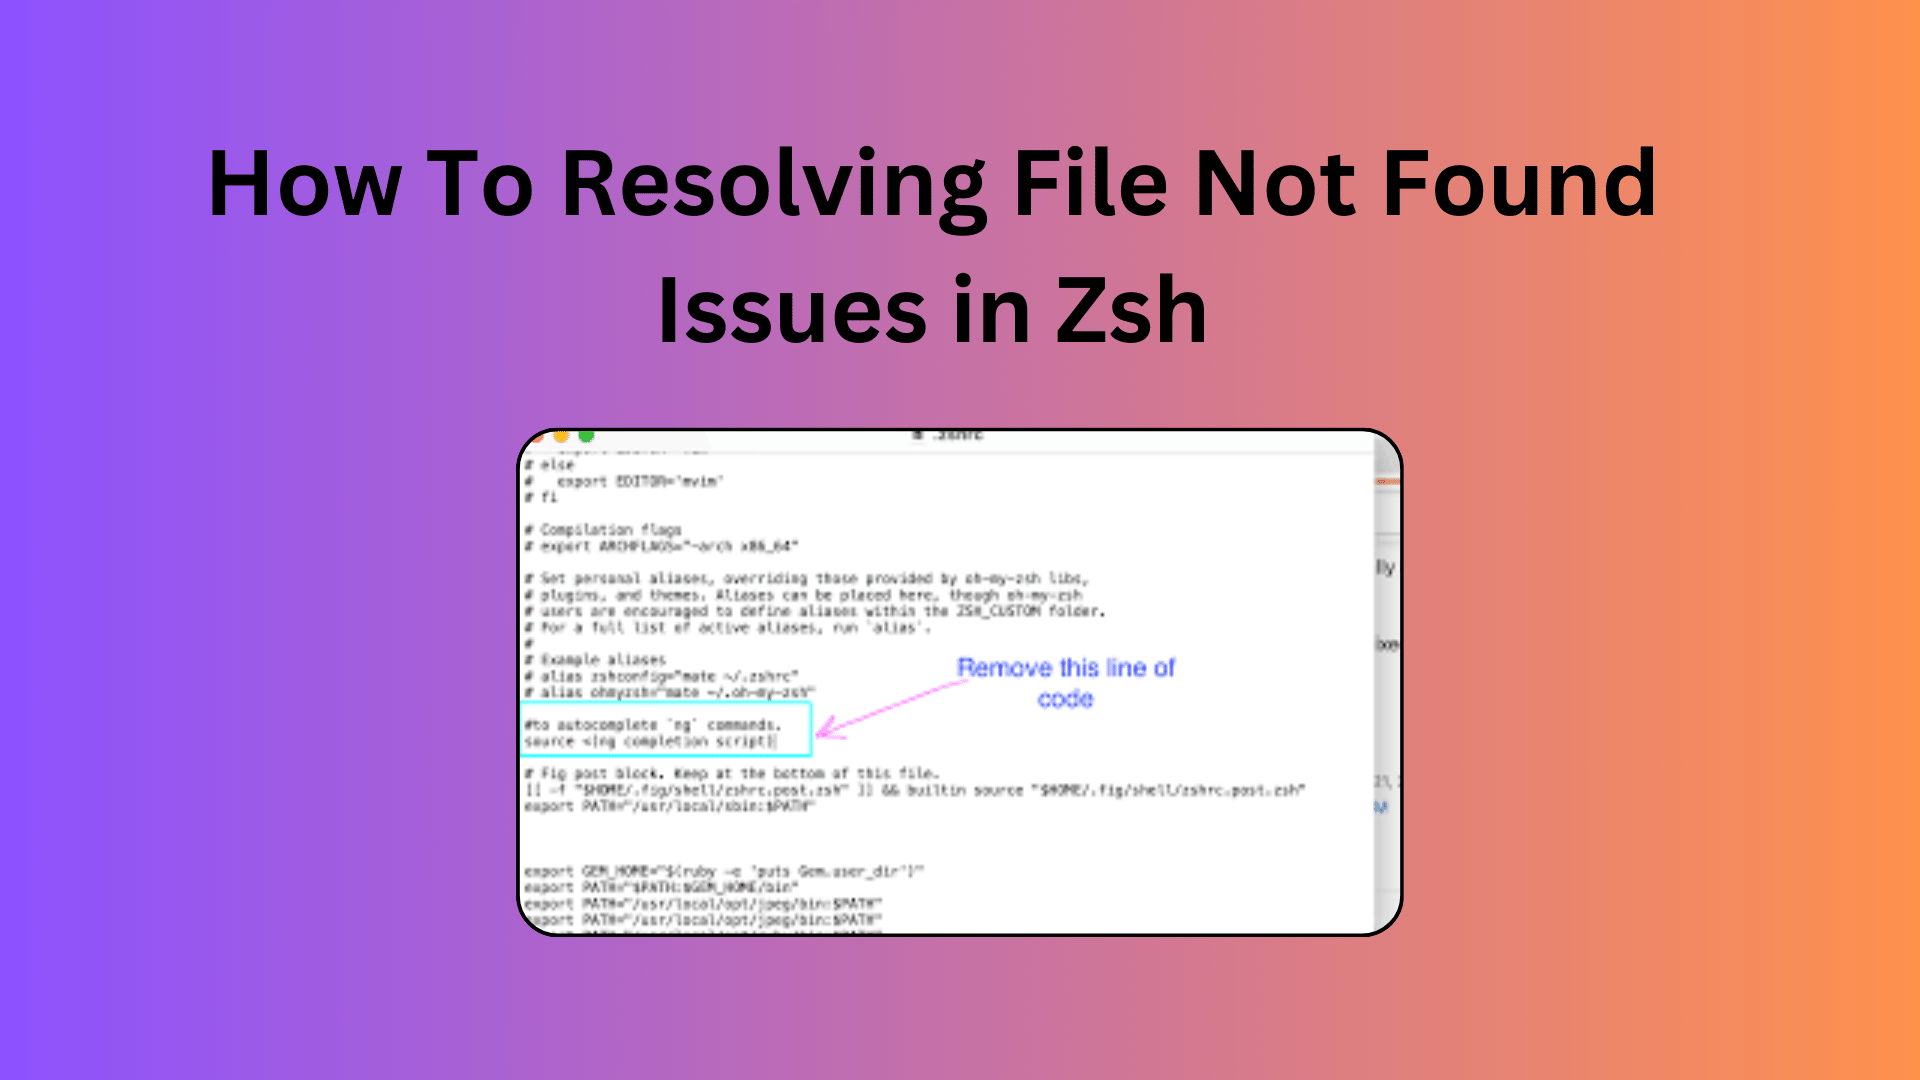 How To Resolving File Not Found Issues in Zsh